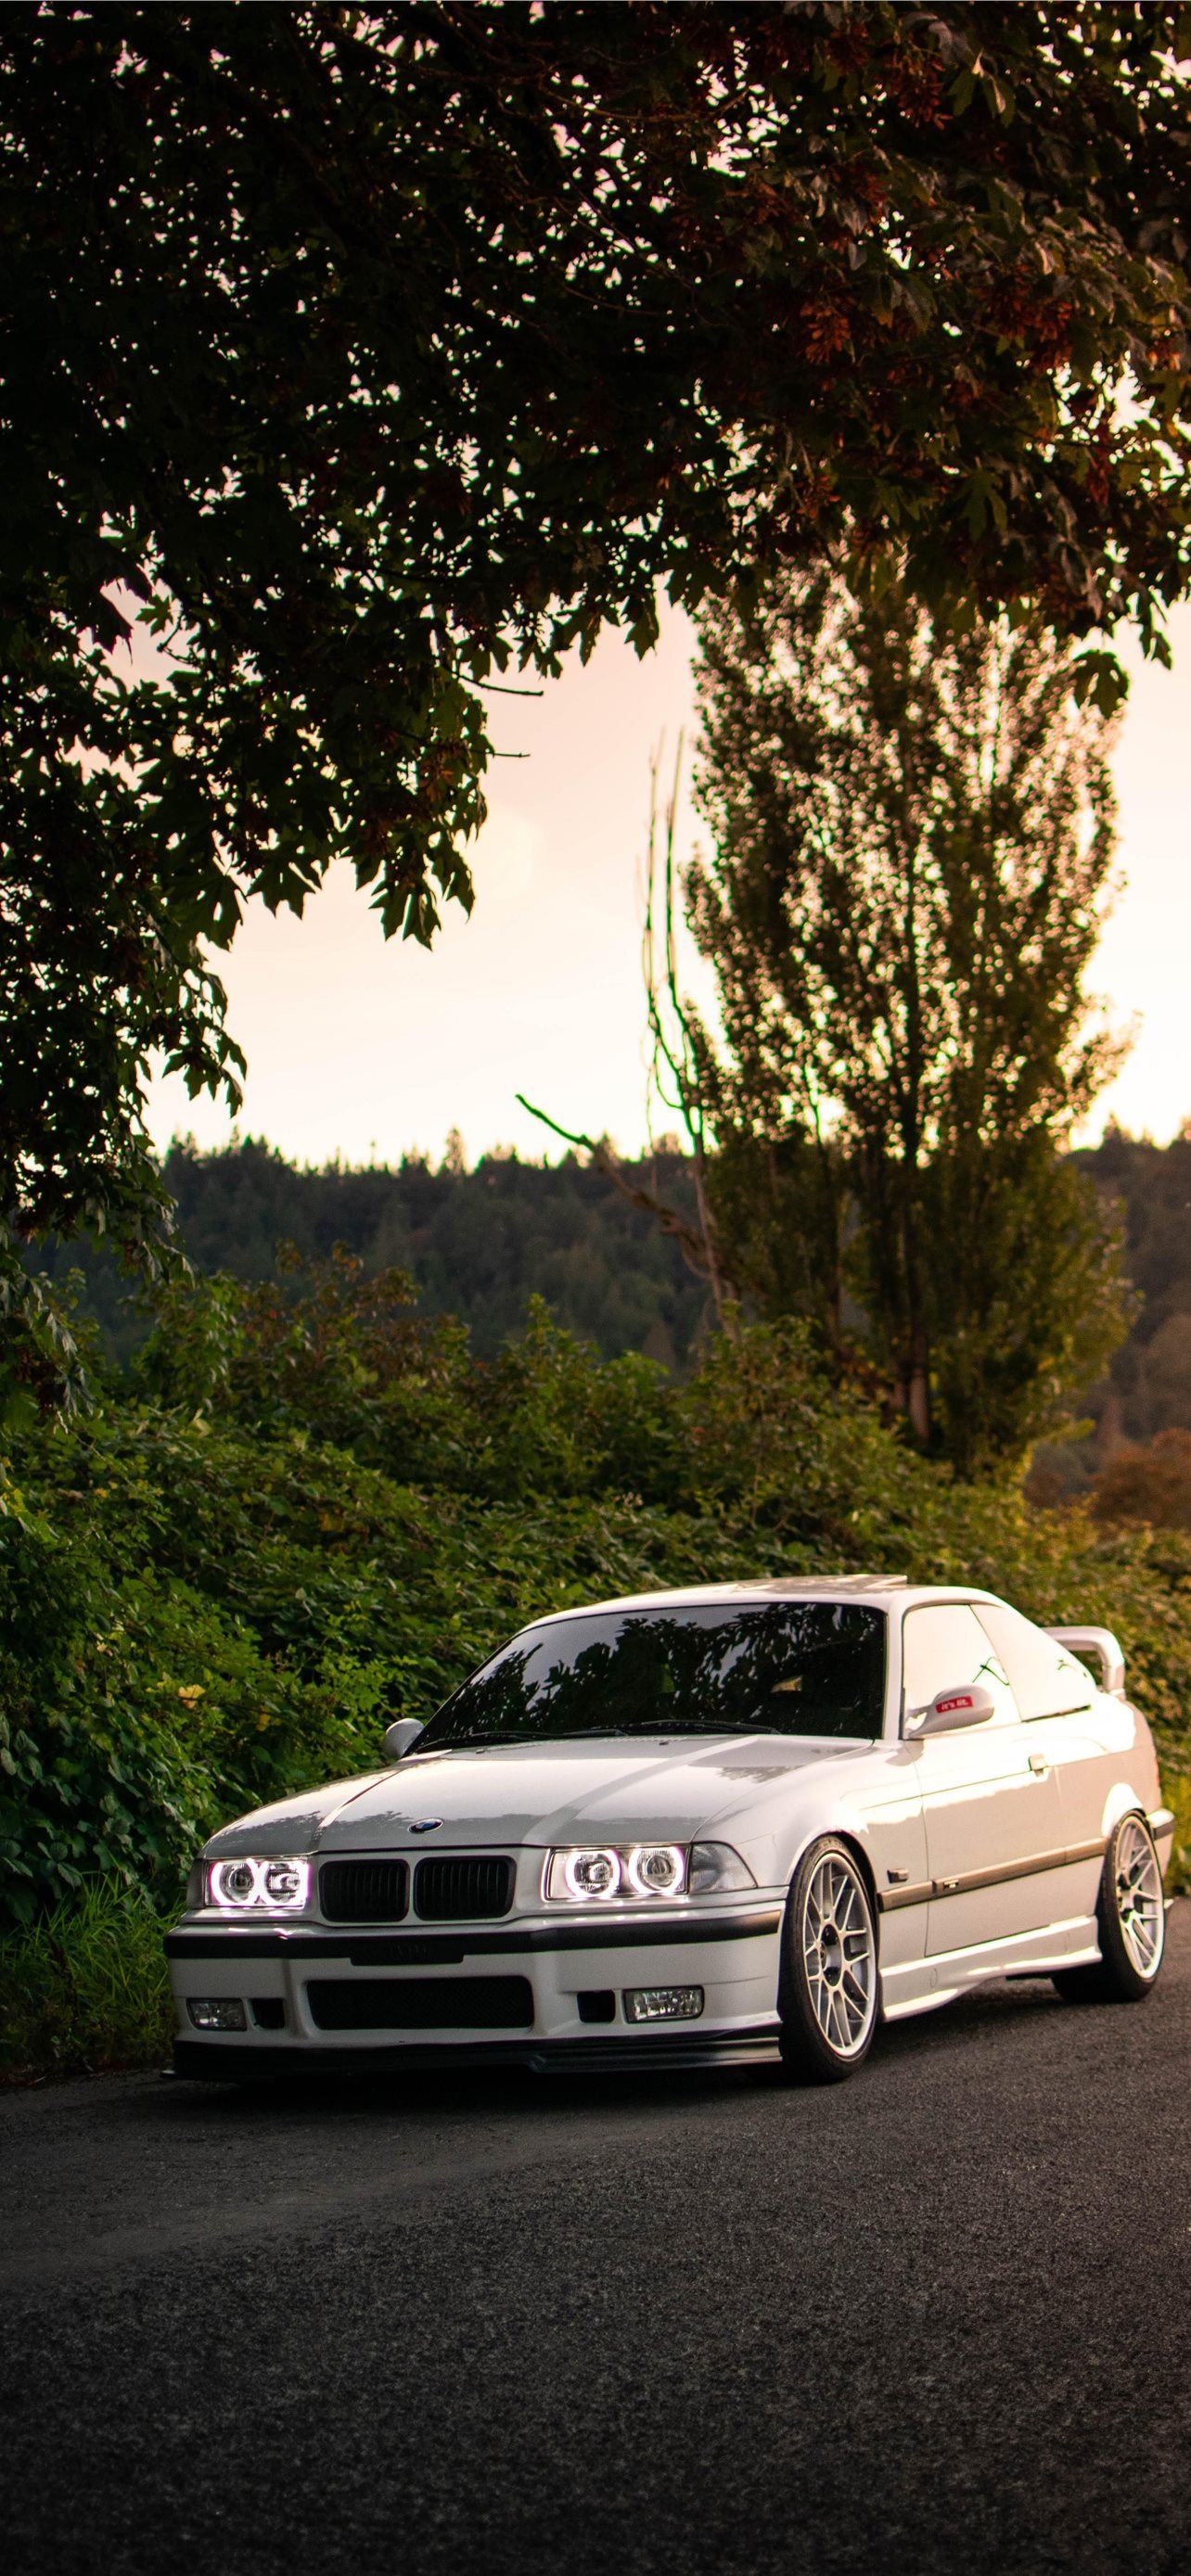 Bmw E36 Iphone Wallpapers Free Download